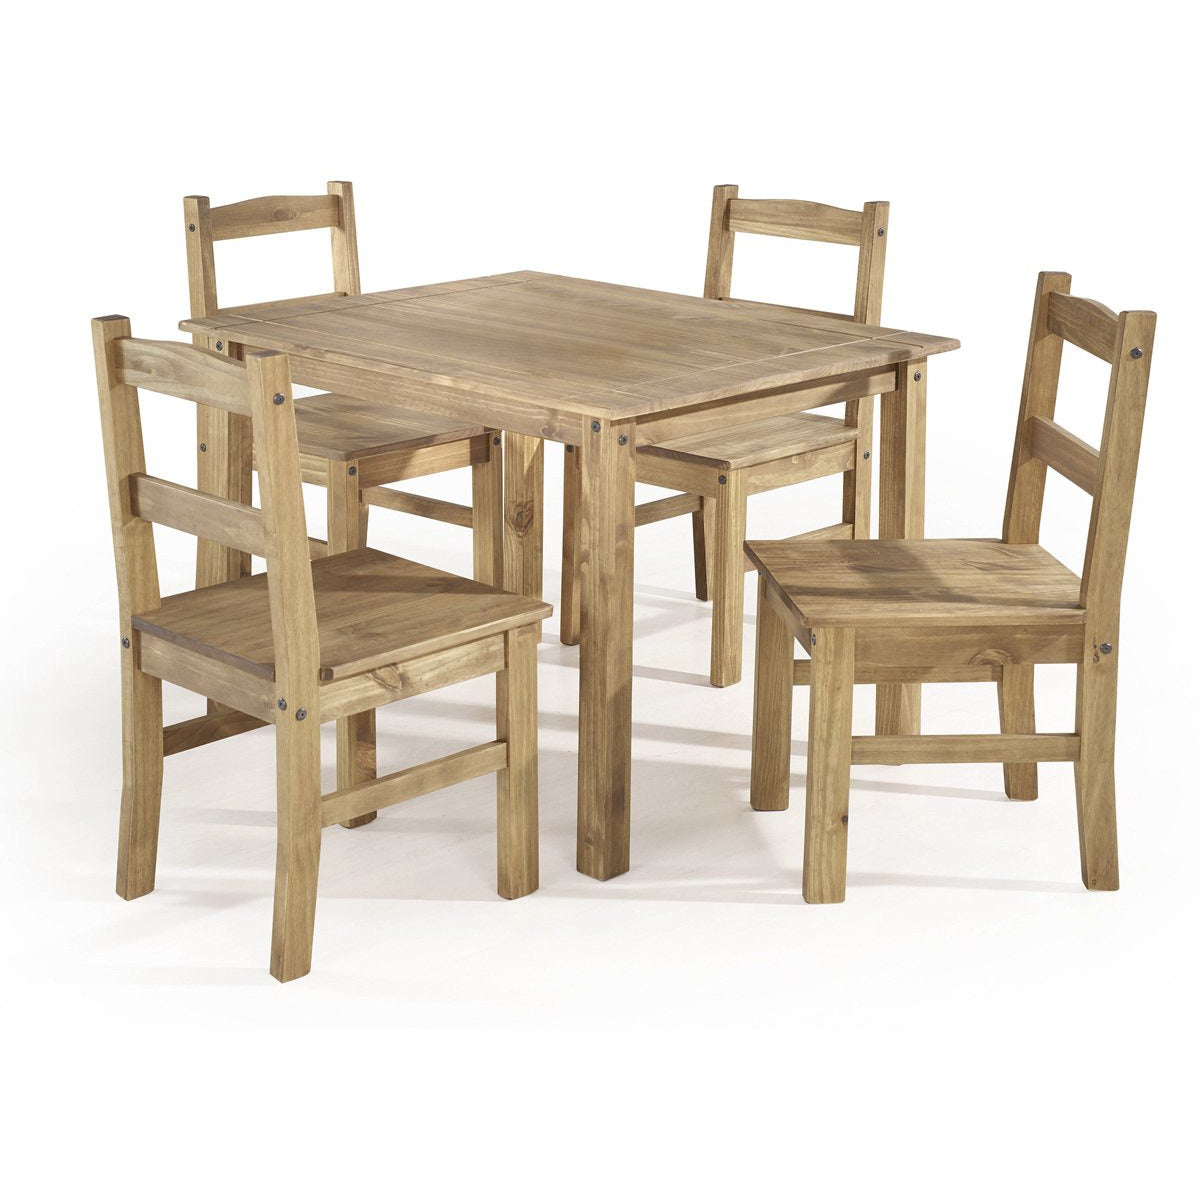 Manhattan Comfort York 5-Piece Solid Wood Dining Set with 1 Table and 4 Chairs in Nature-Minimal & Modern